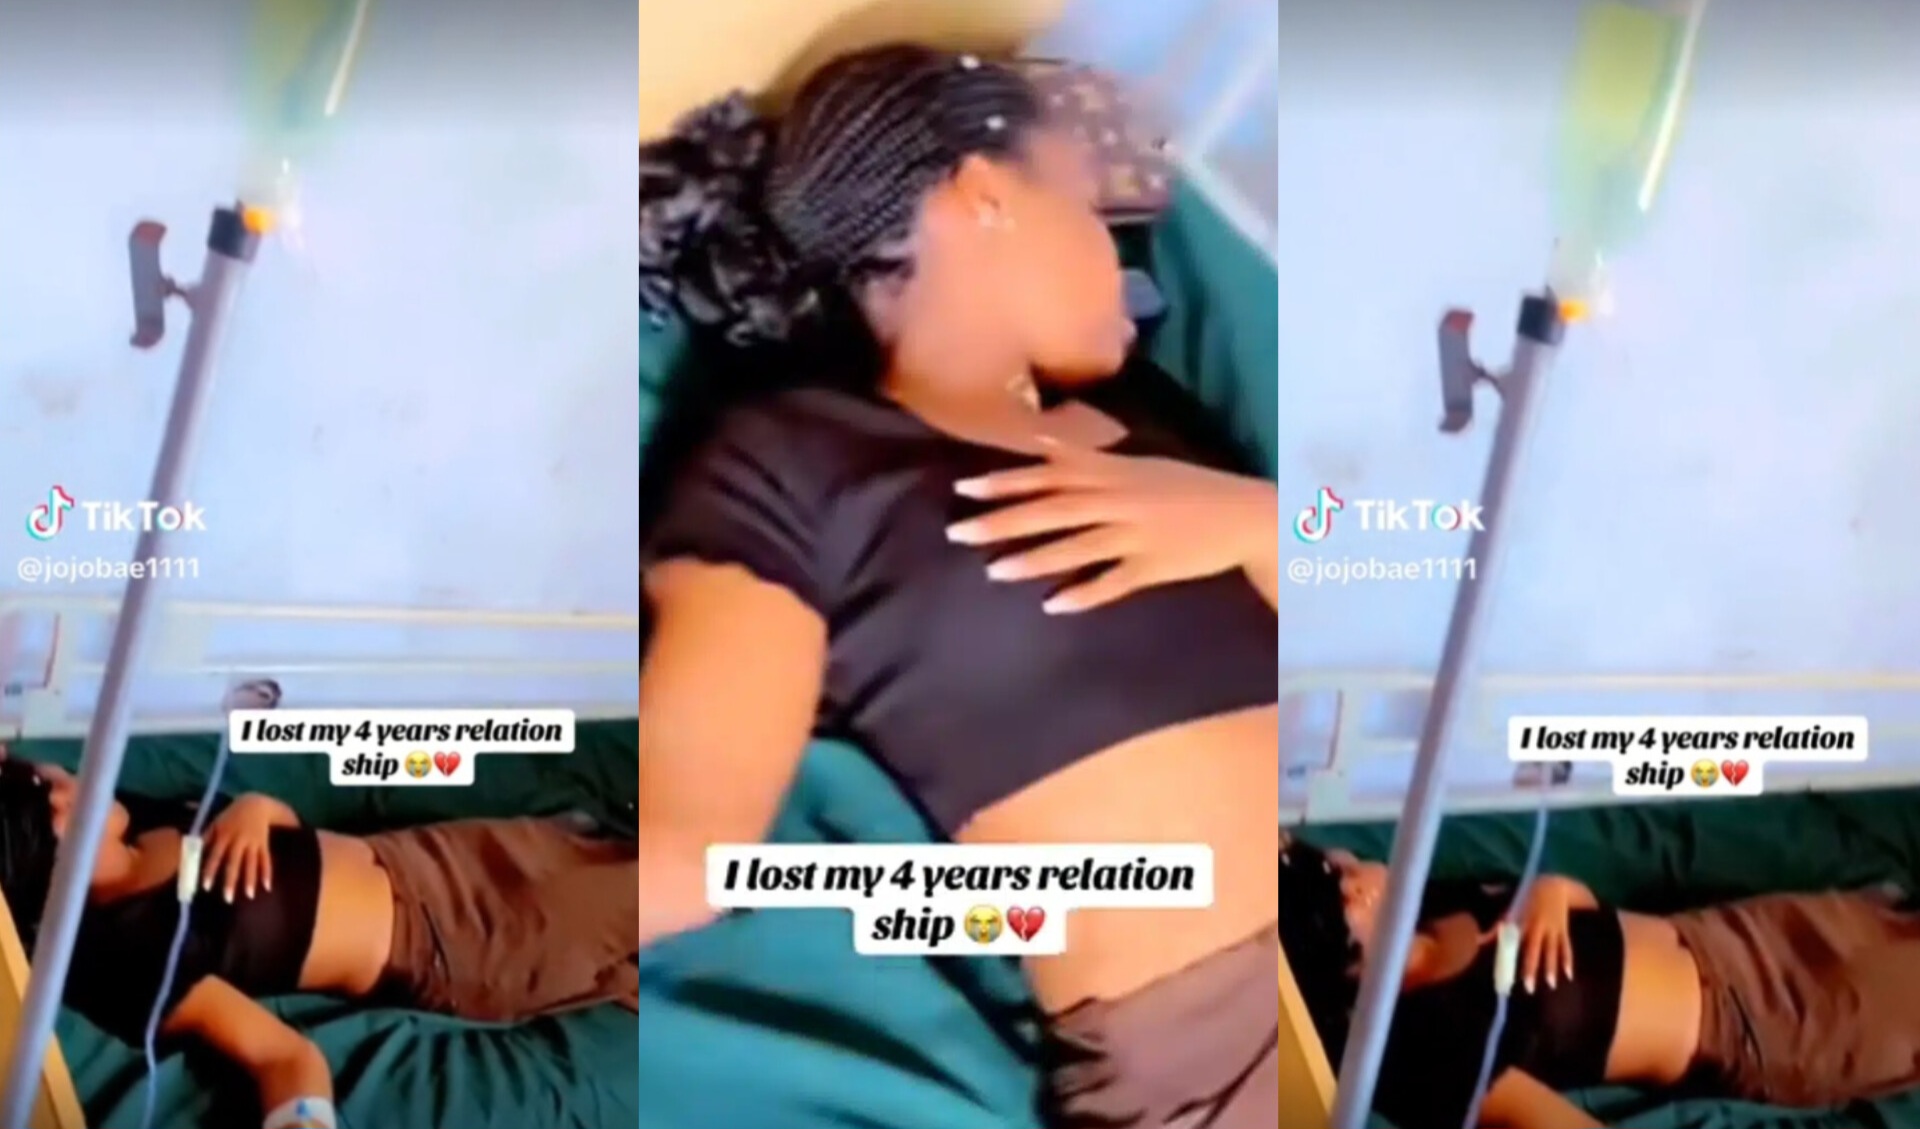 A Nigerian Lady Hospitalized After 4-Year Relationship Ends